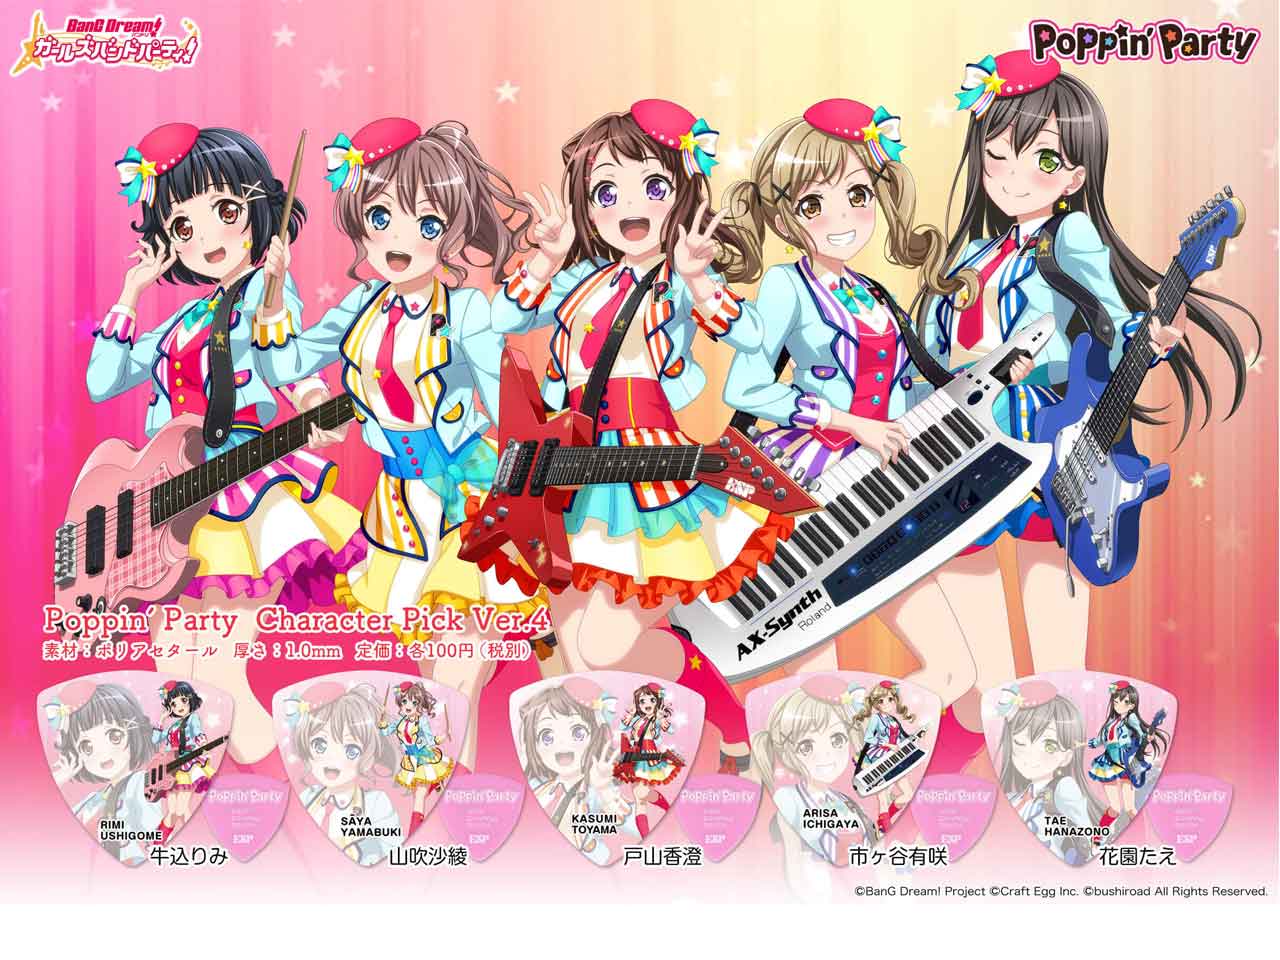 【ESP×BanG Dream!コラボピック】Poppin’Party Character Pick Ver.4 "戸山香澄"10枚セット（GBP Kasumi Poppin Party 4）